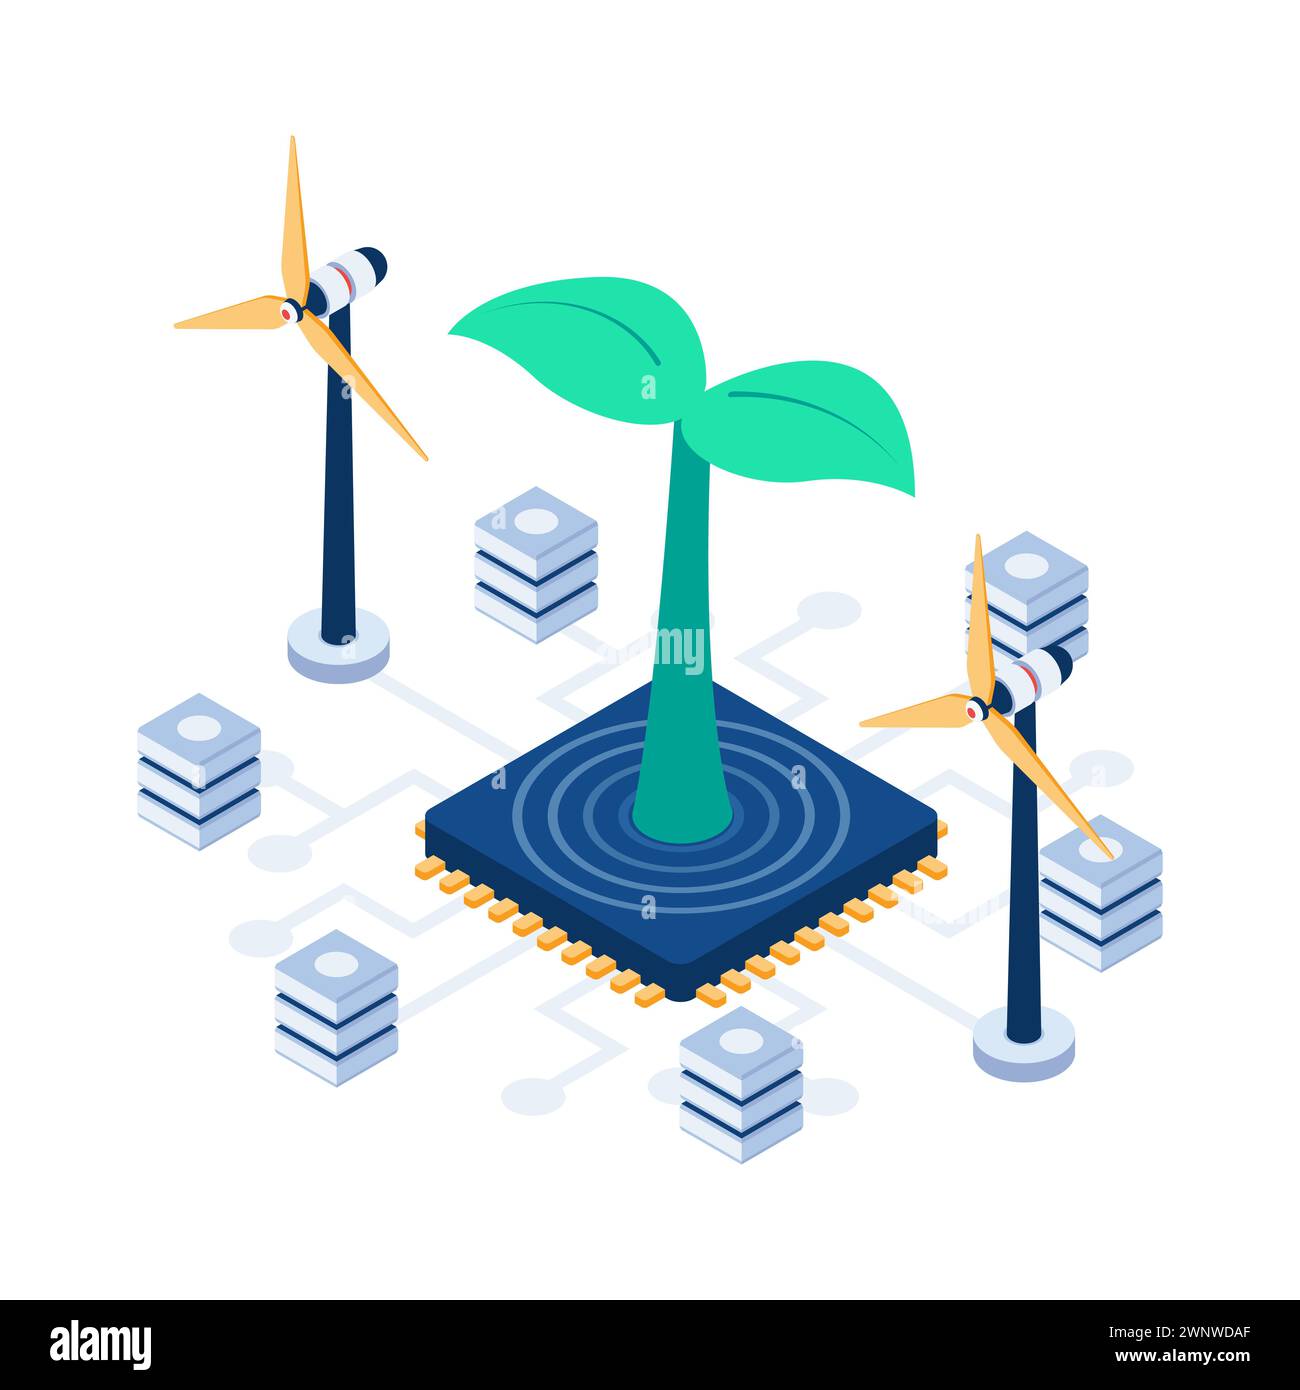 Flat 3d Isometric Plant Growth on Computer Microchip. Eco Technology Concept. Stock Vector